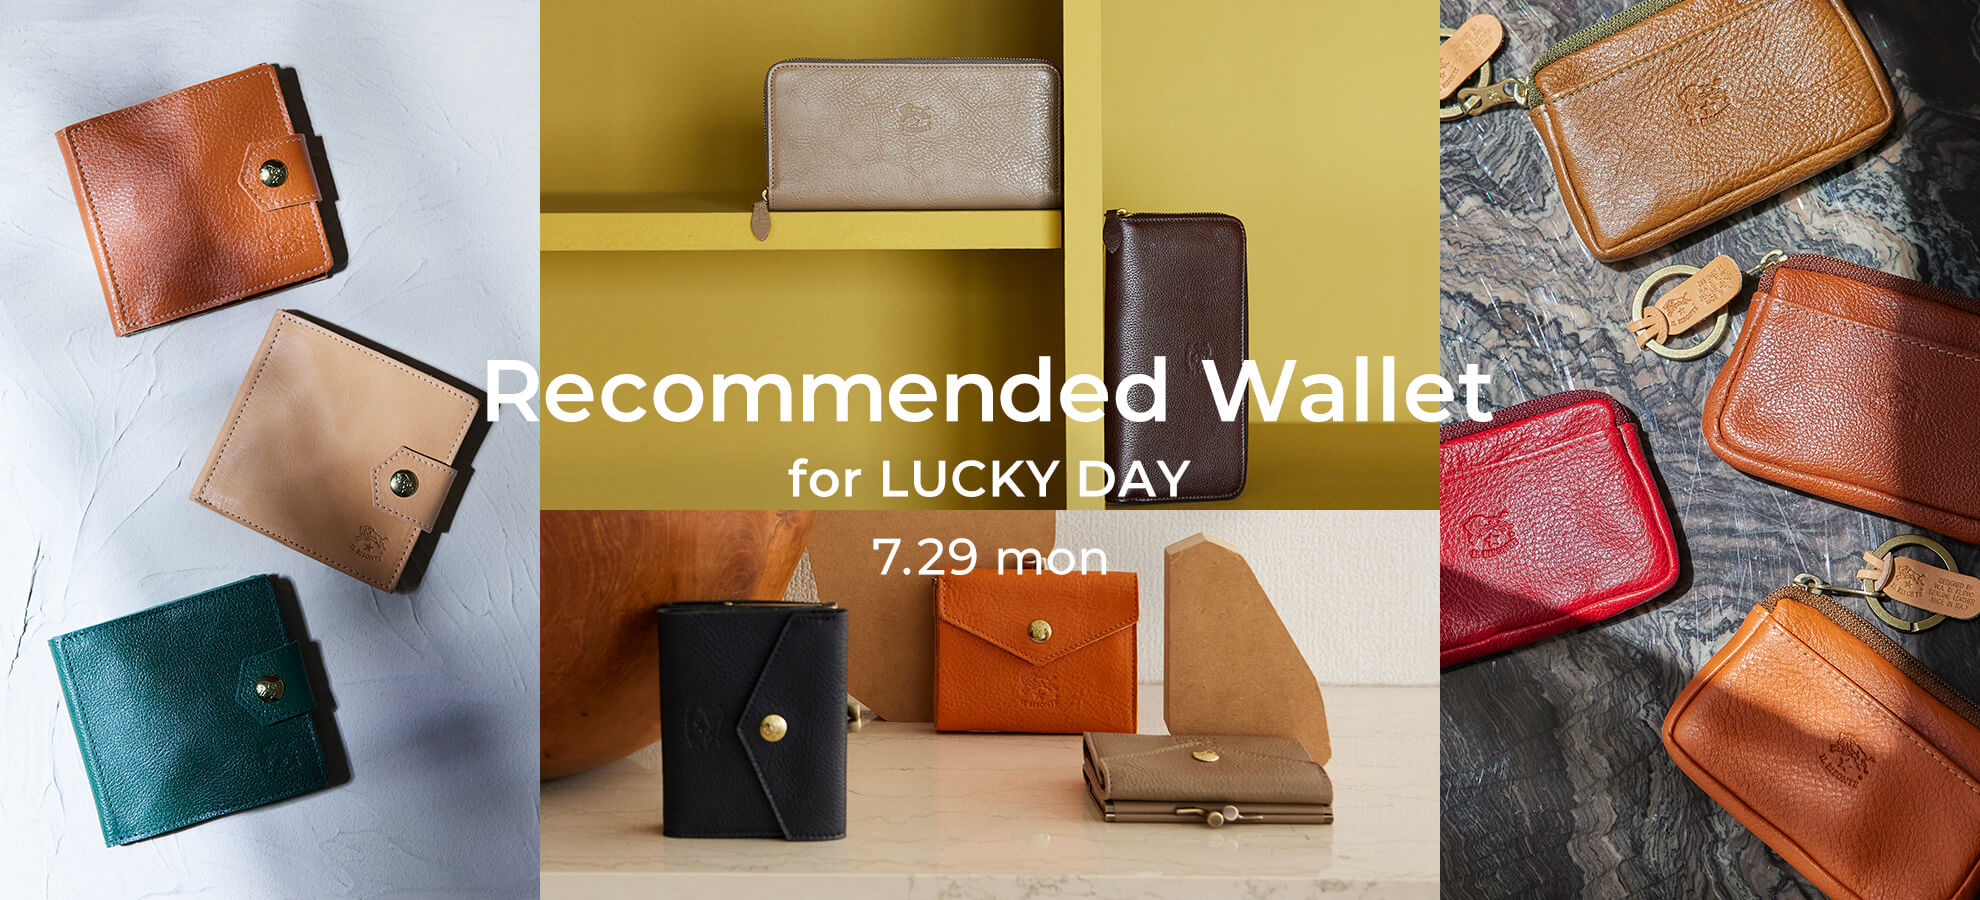 ILBISONTE RECOMMENDED WALLET